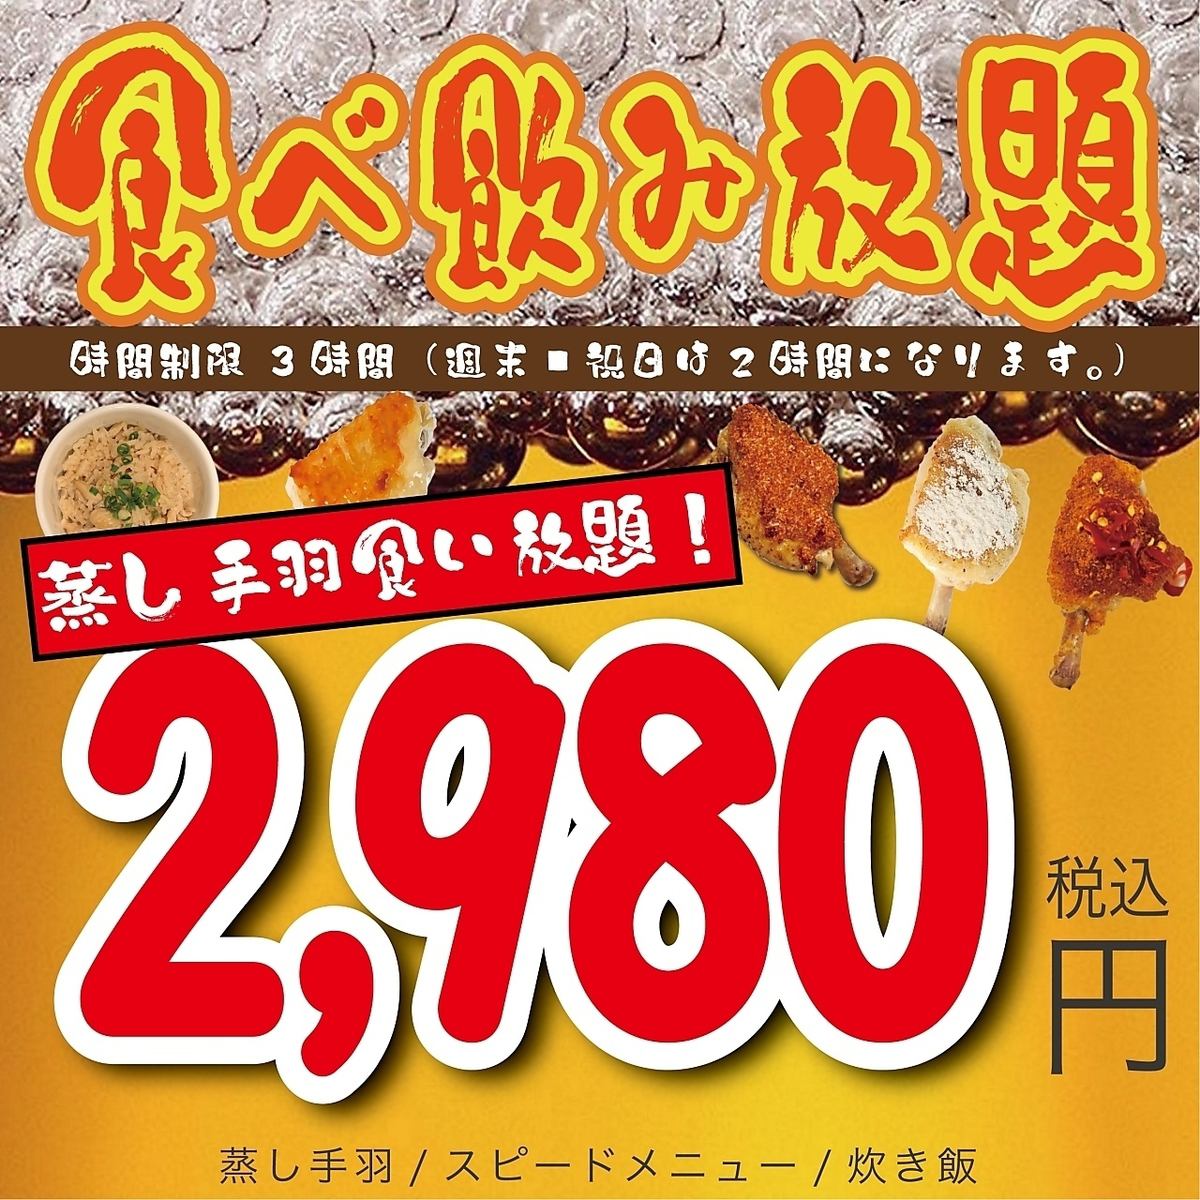 An all-you-can-eat and drink course that includes steamed chicken wings, dumplings, and a la carte dishes starts at 2,980 yen!